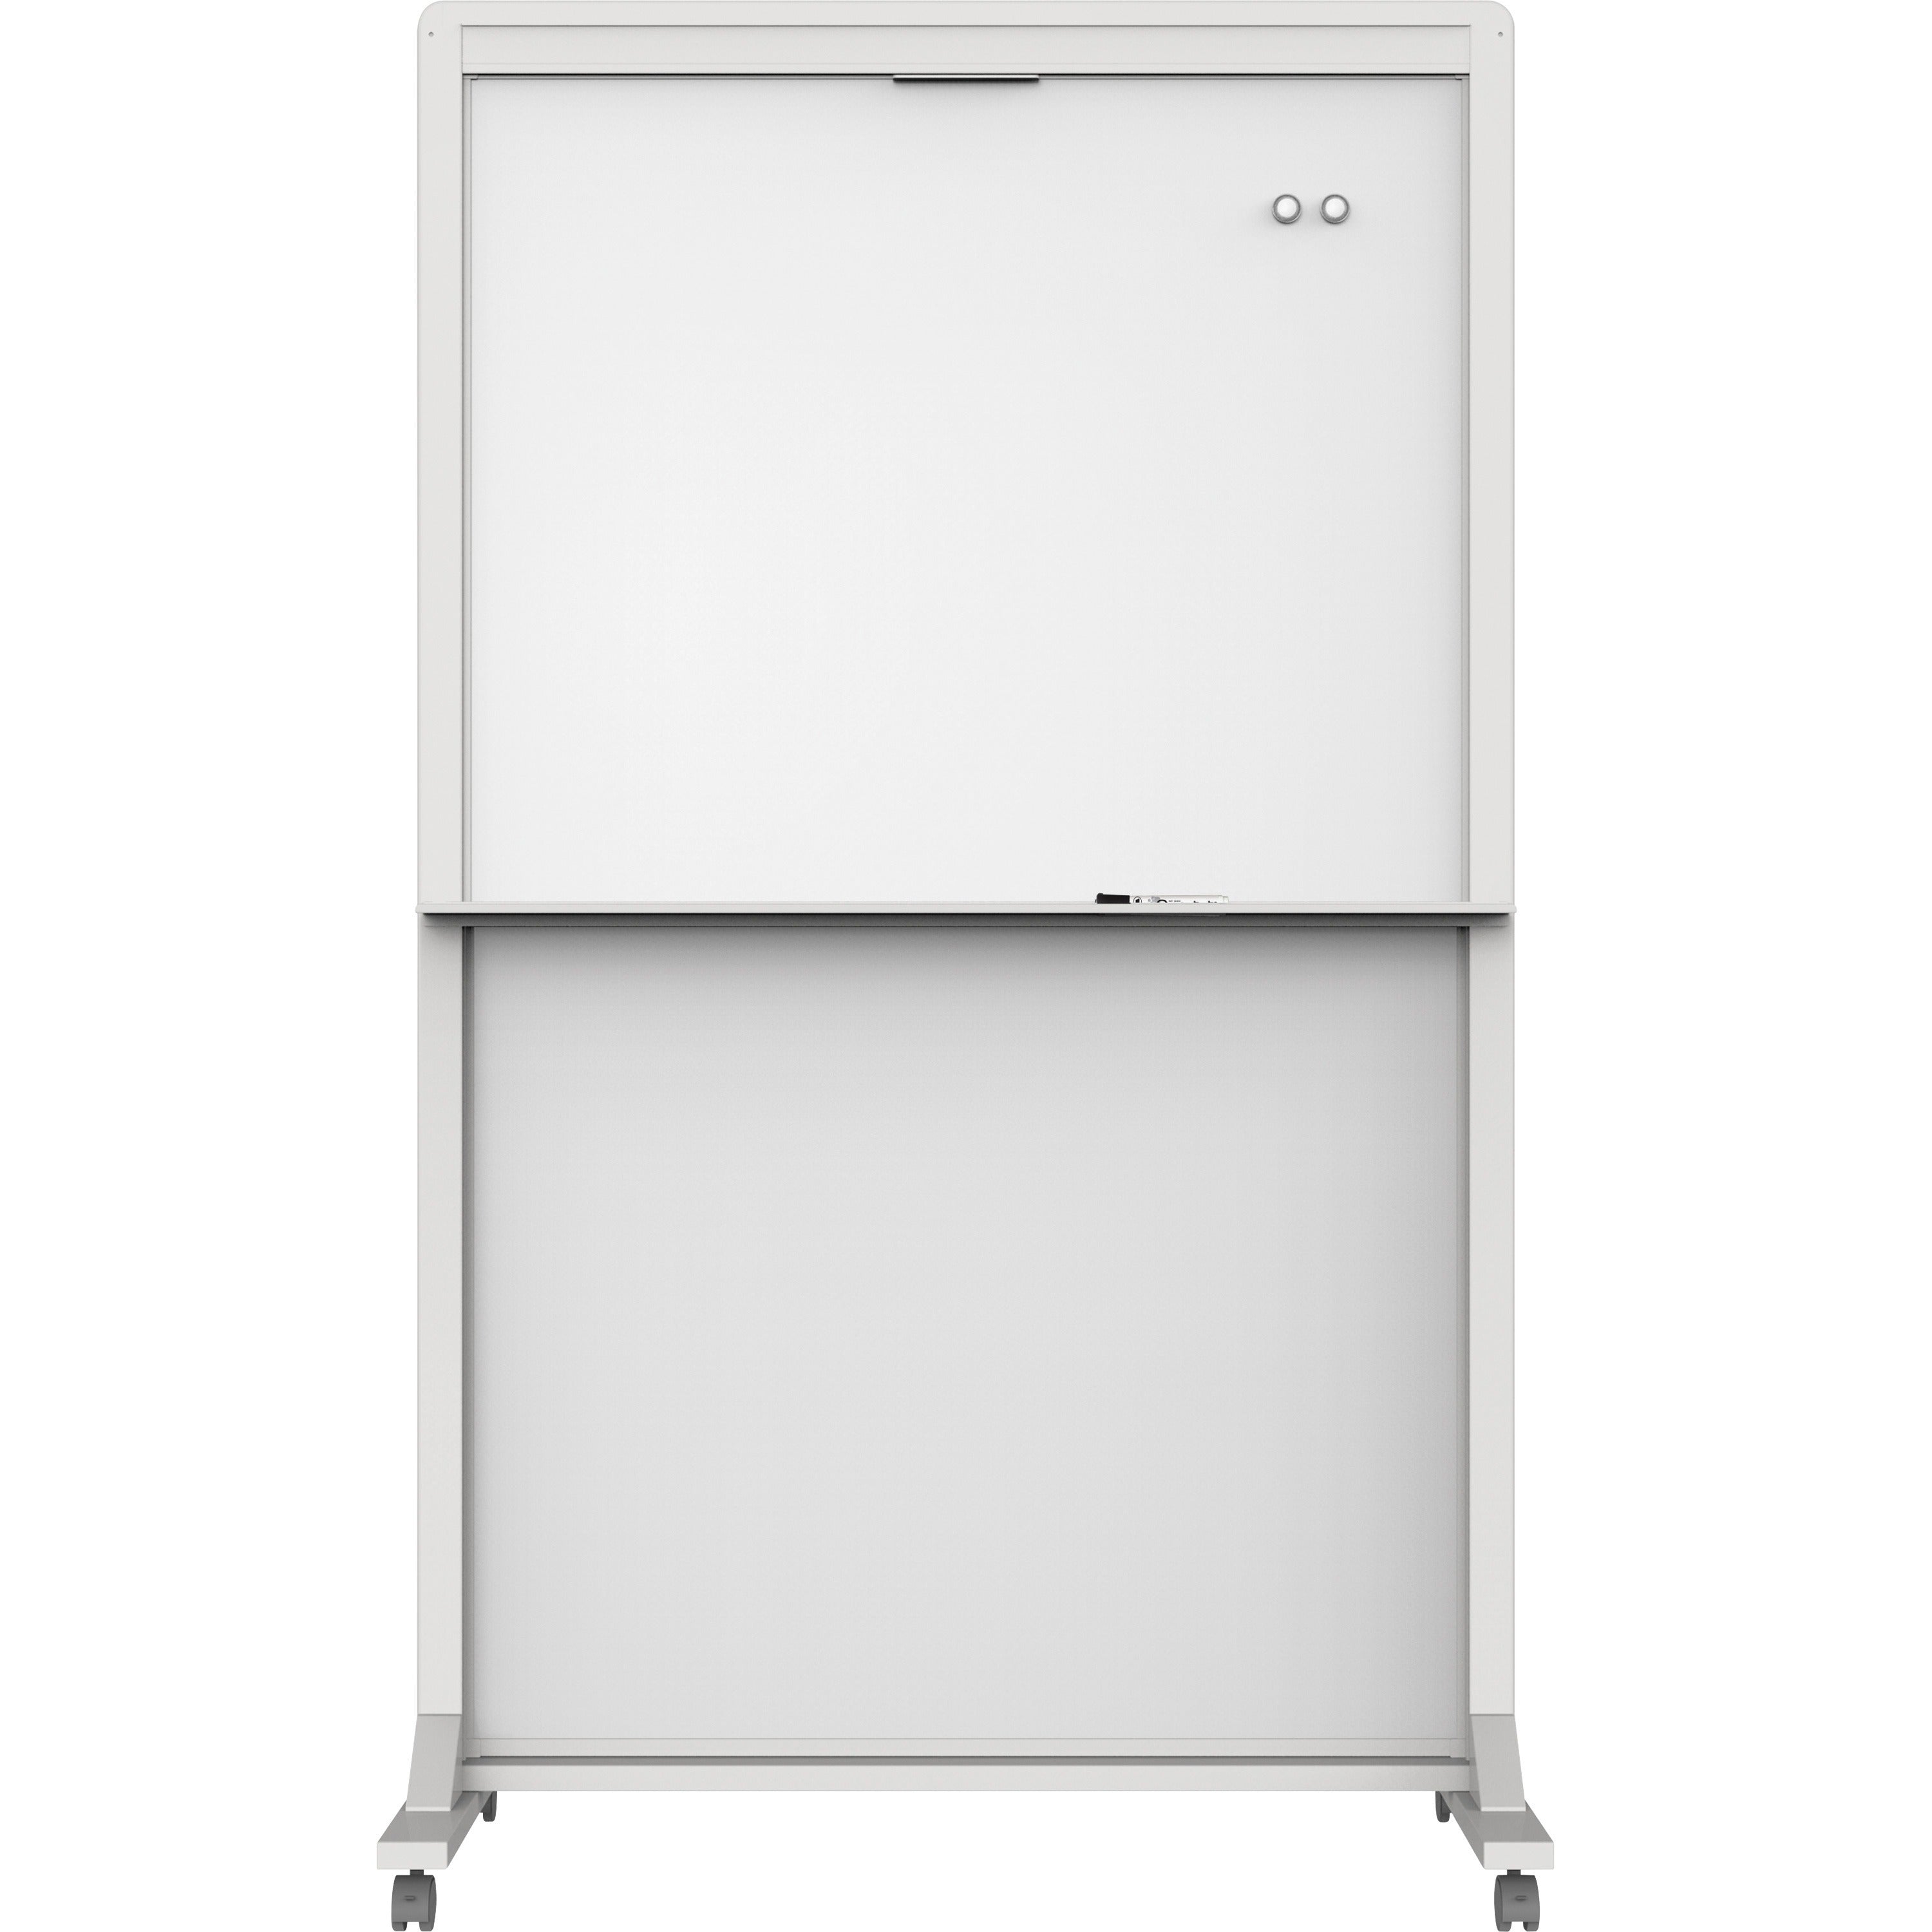 quartet-motion-dual-track-mobile-magnetic-dry-erase-easel-40-33-ft-width-x-68-57-ft-height-white-painted-steel-surface-white-aluminum-aluminum-frame-rectangle-horizontal-magnetic-assembly-required-1-each_qrtecm4068dt - 1